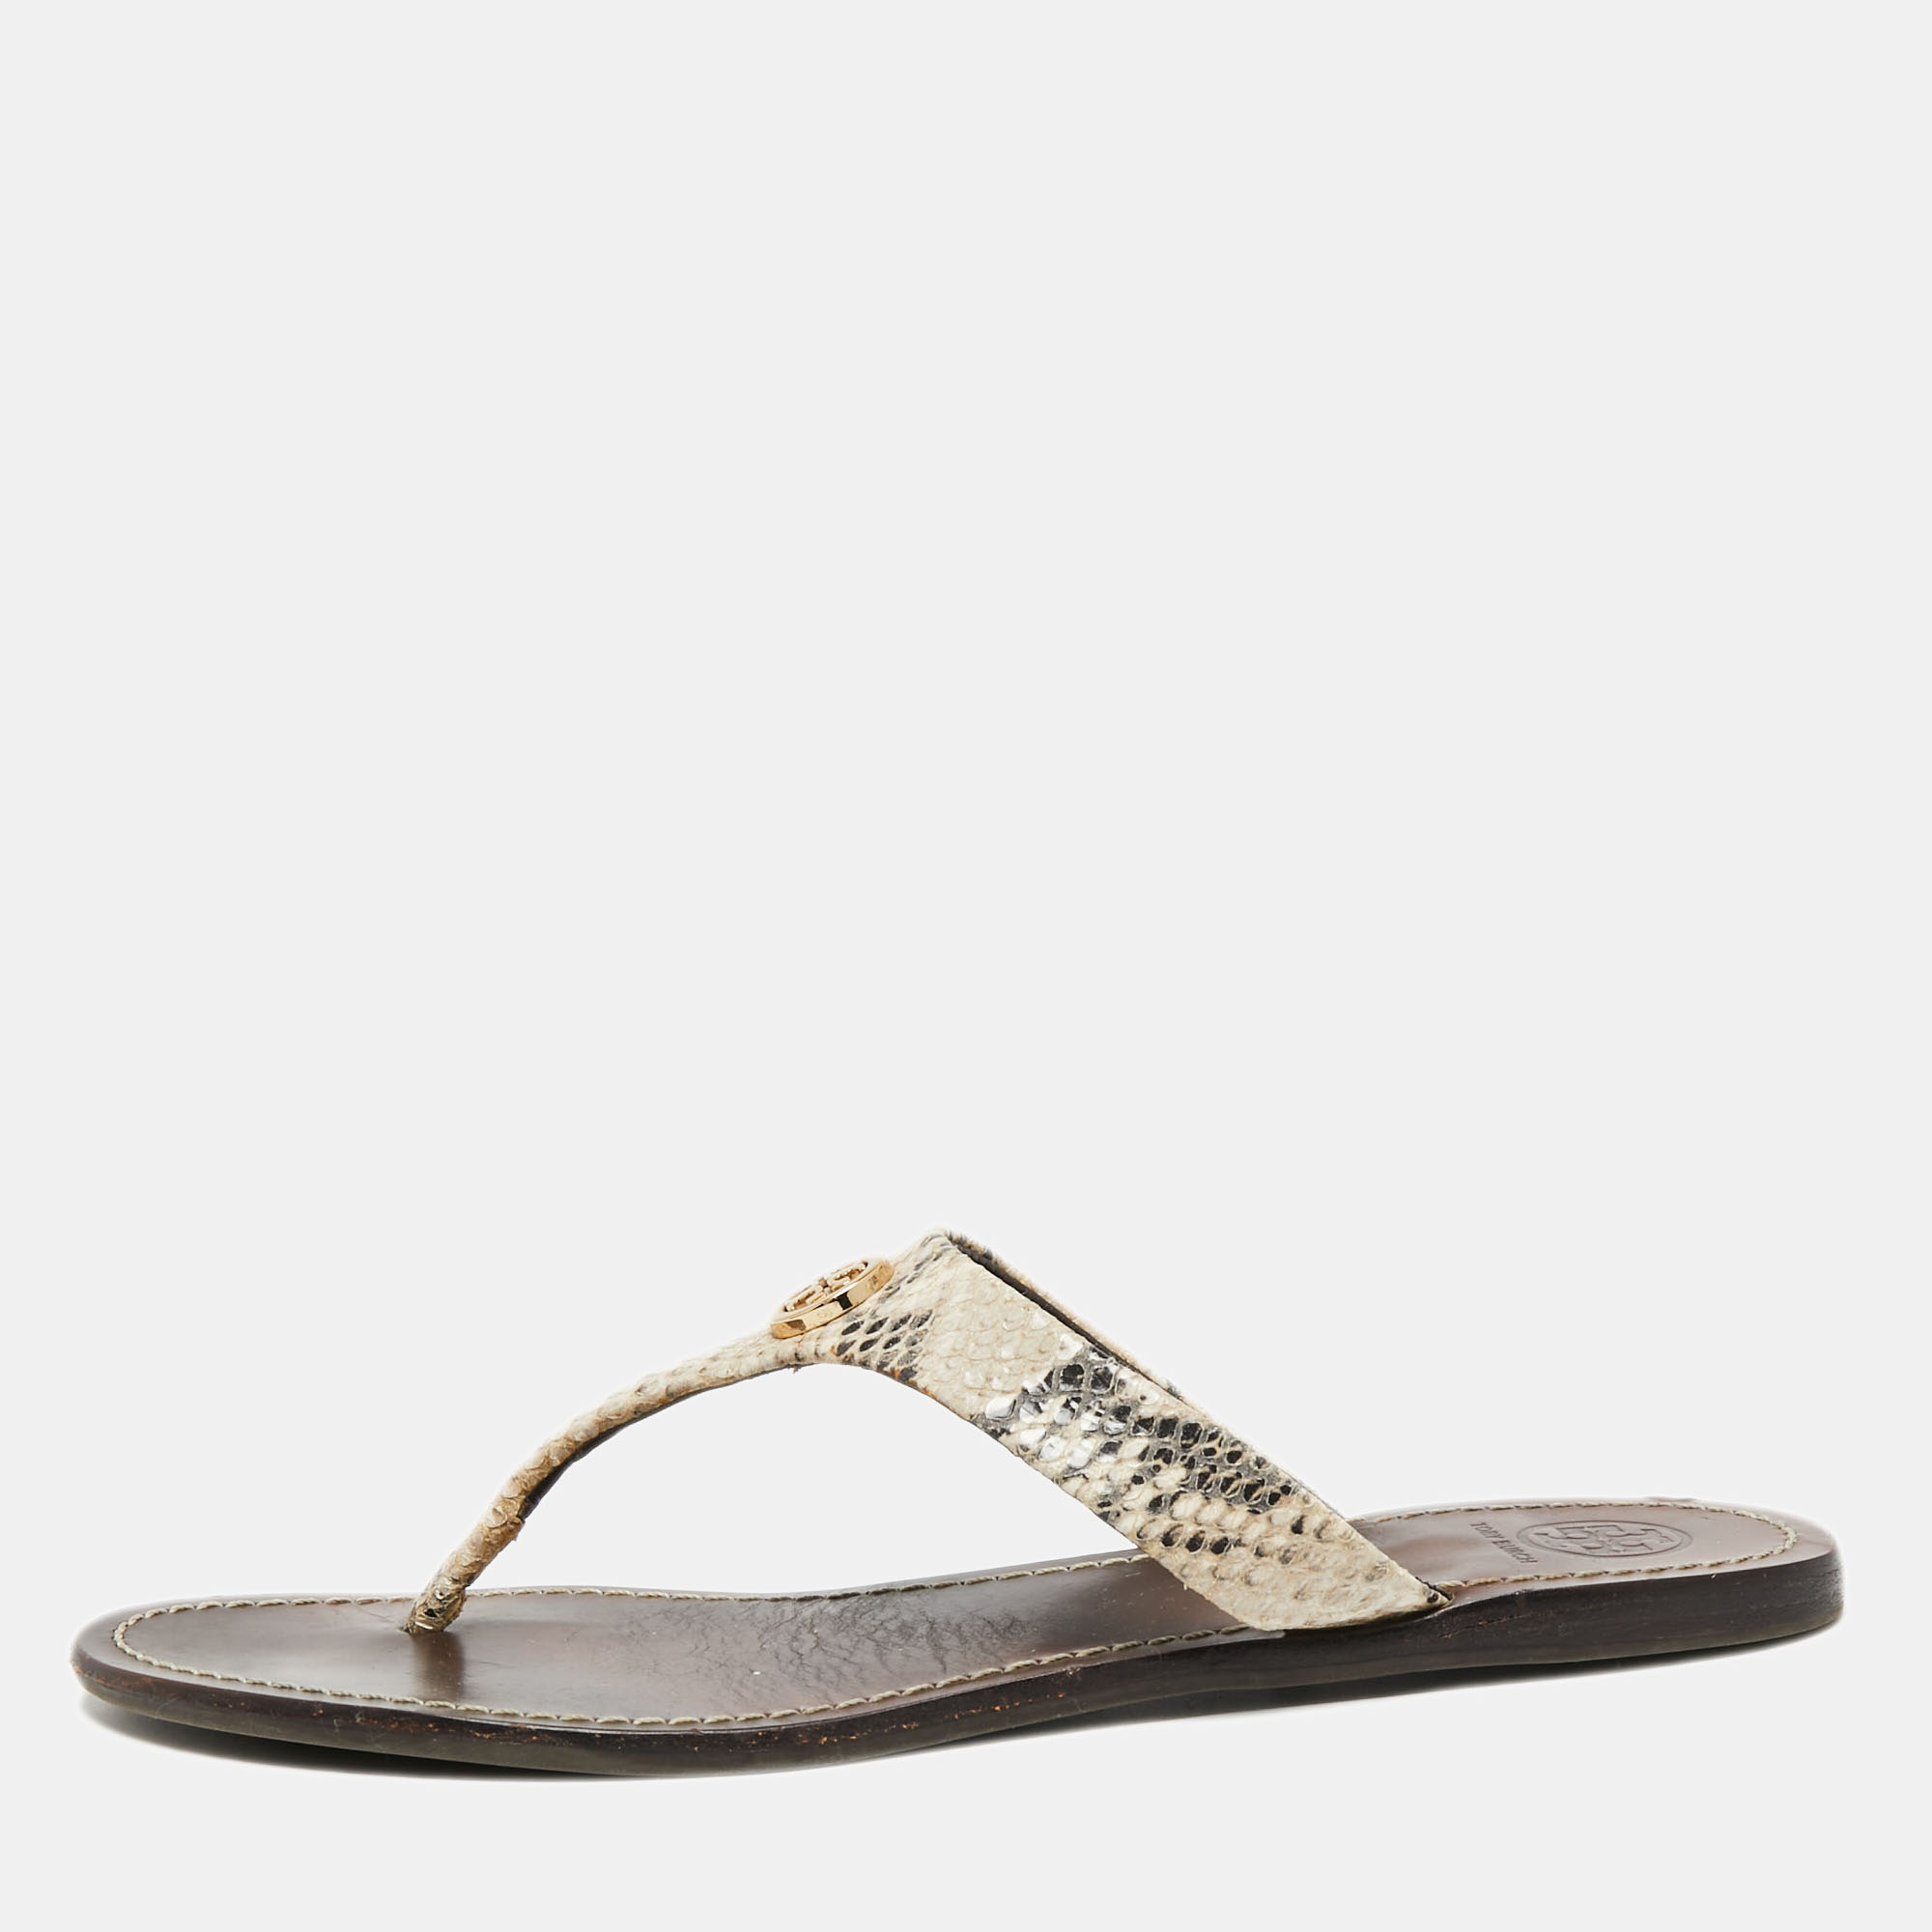 

Tory Burch Beige/Black Snakeskin Embossed Leather Flat Thong Sandals Size